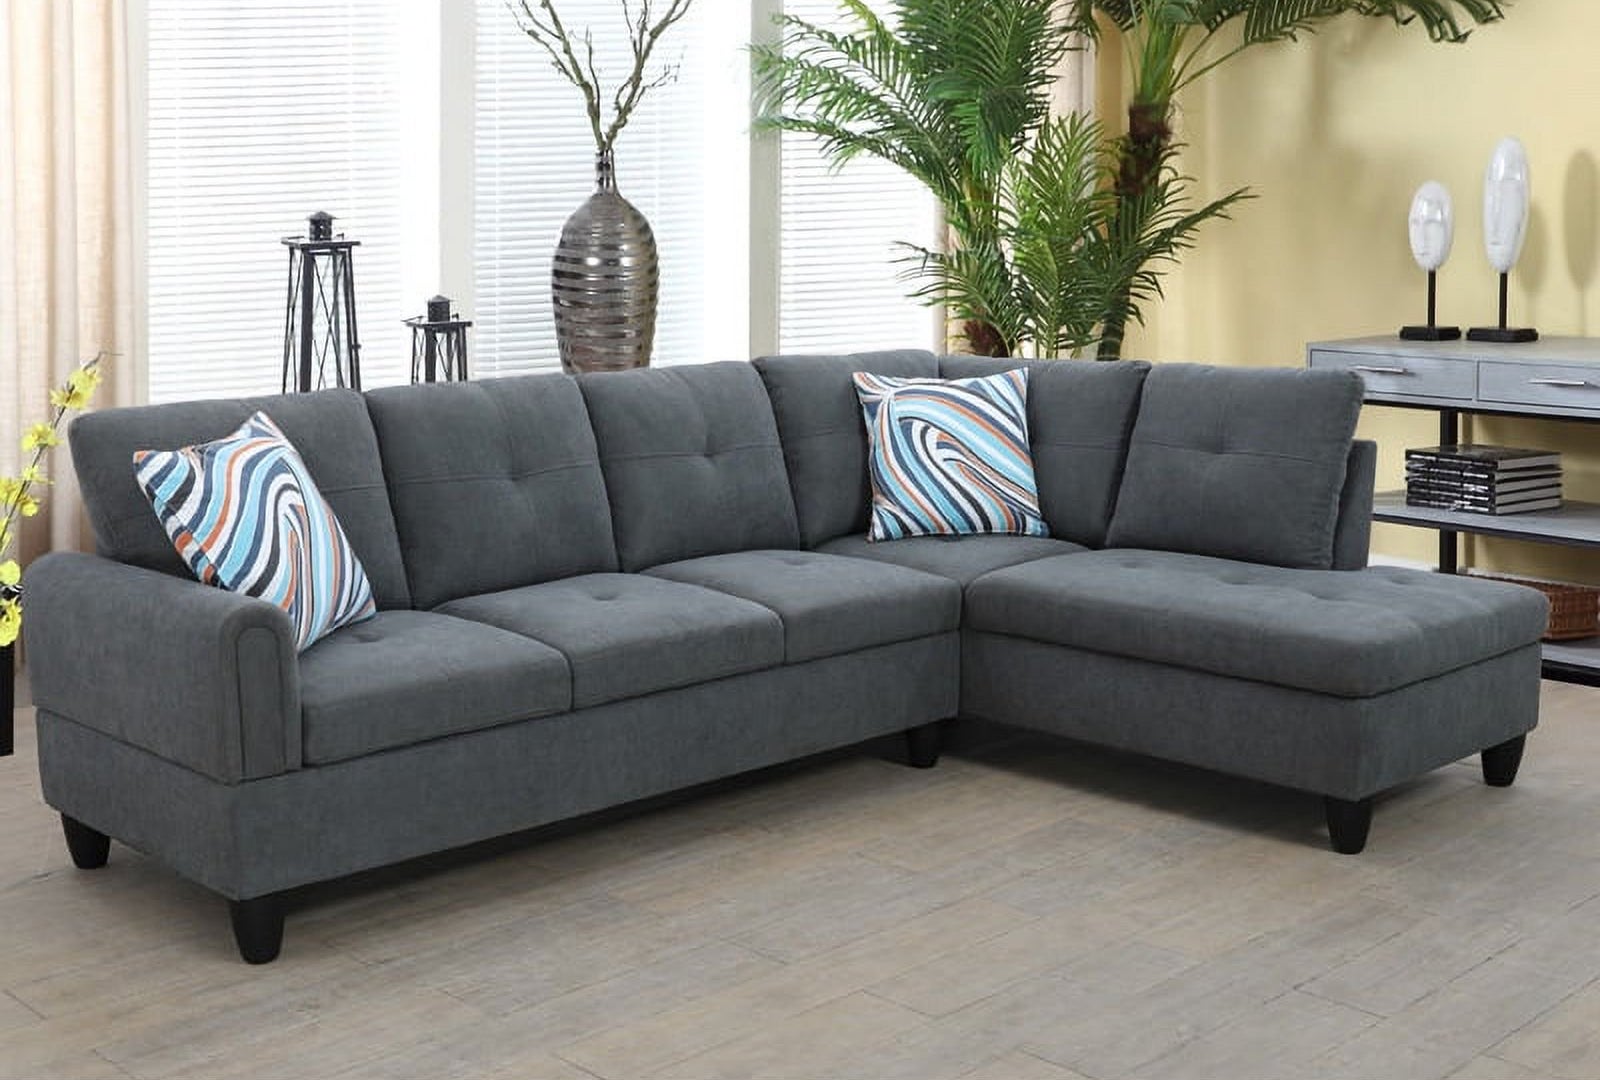 the sectional in a living room